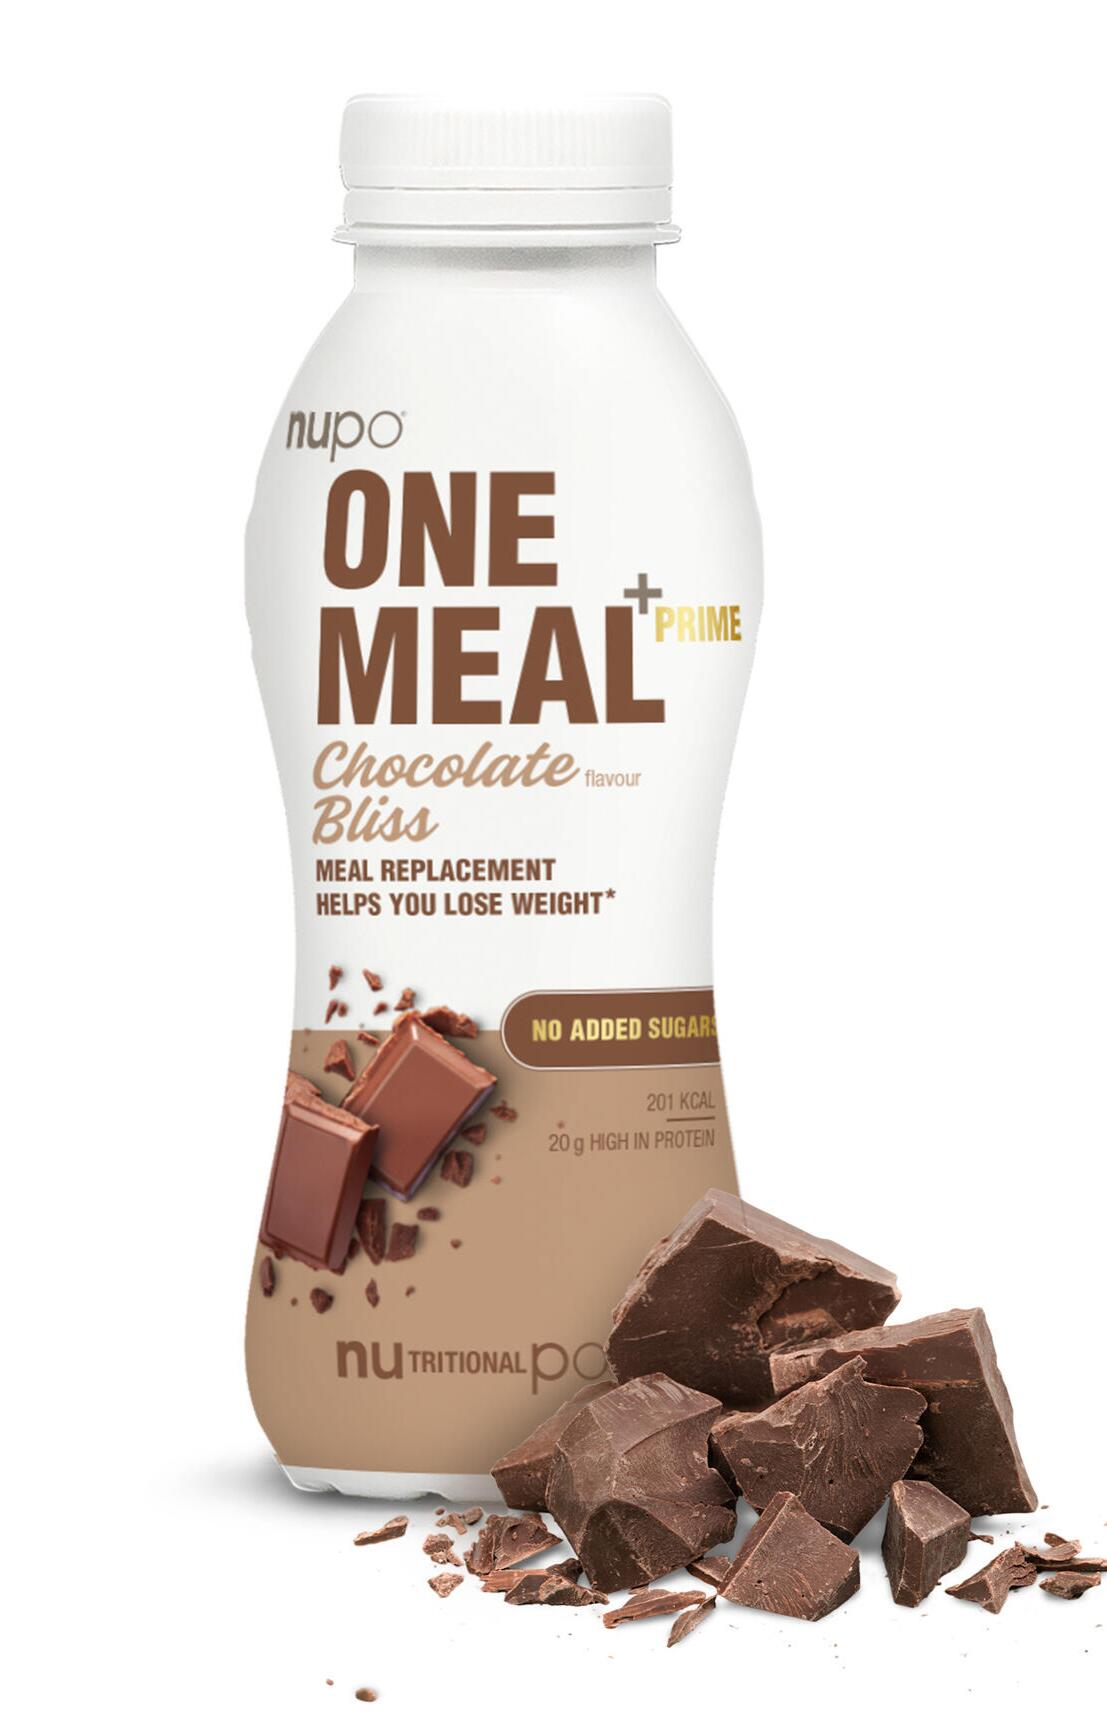 Nupo One Meal +Prime Shake  -  Chocolate Bliss, 330ml.